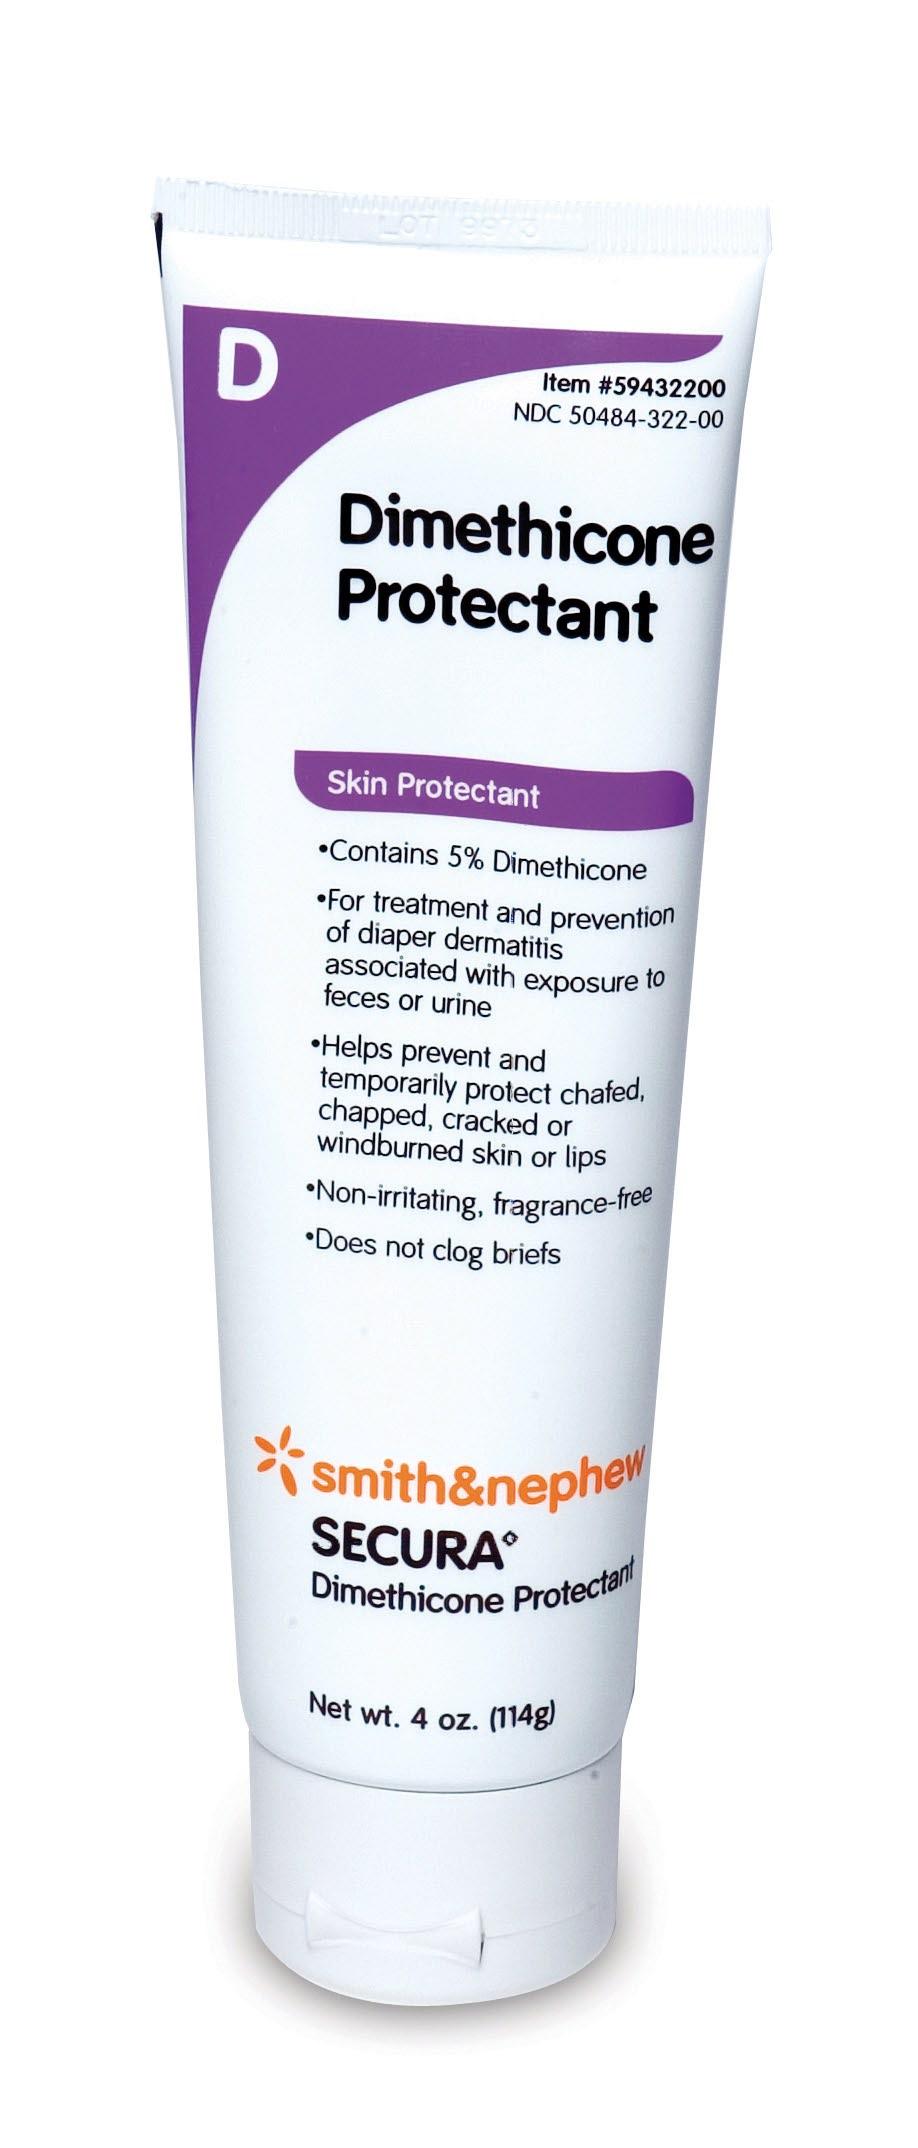 Protective Ointment SECURA Contains 98 percent Petrolatum Helps prevent and treat minor skin irritation associated with incontinence Protects and relieves chafed, chapped or